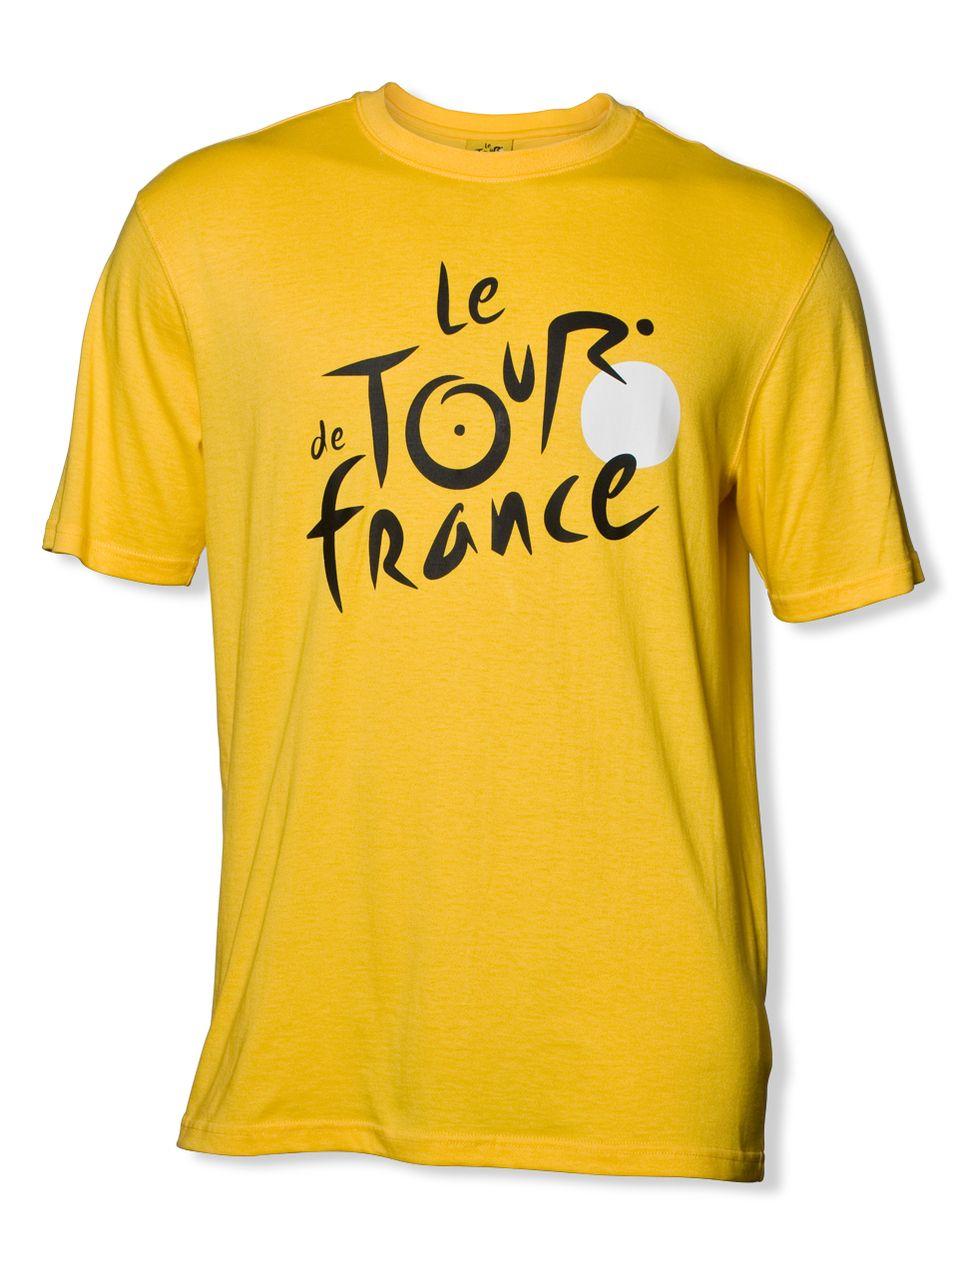 Le Tour De France Logo - le Tour de France Logo T-Shirt in Yellow. Adult sizes. - Peak Cycle Wear